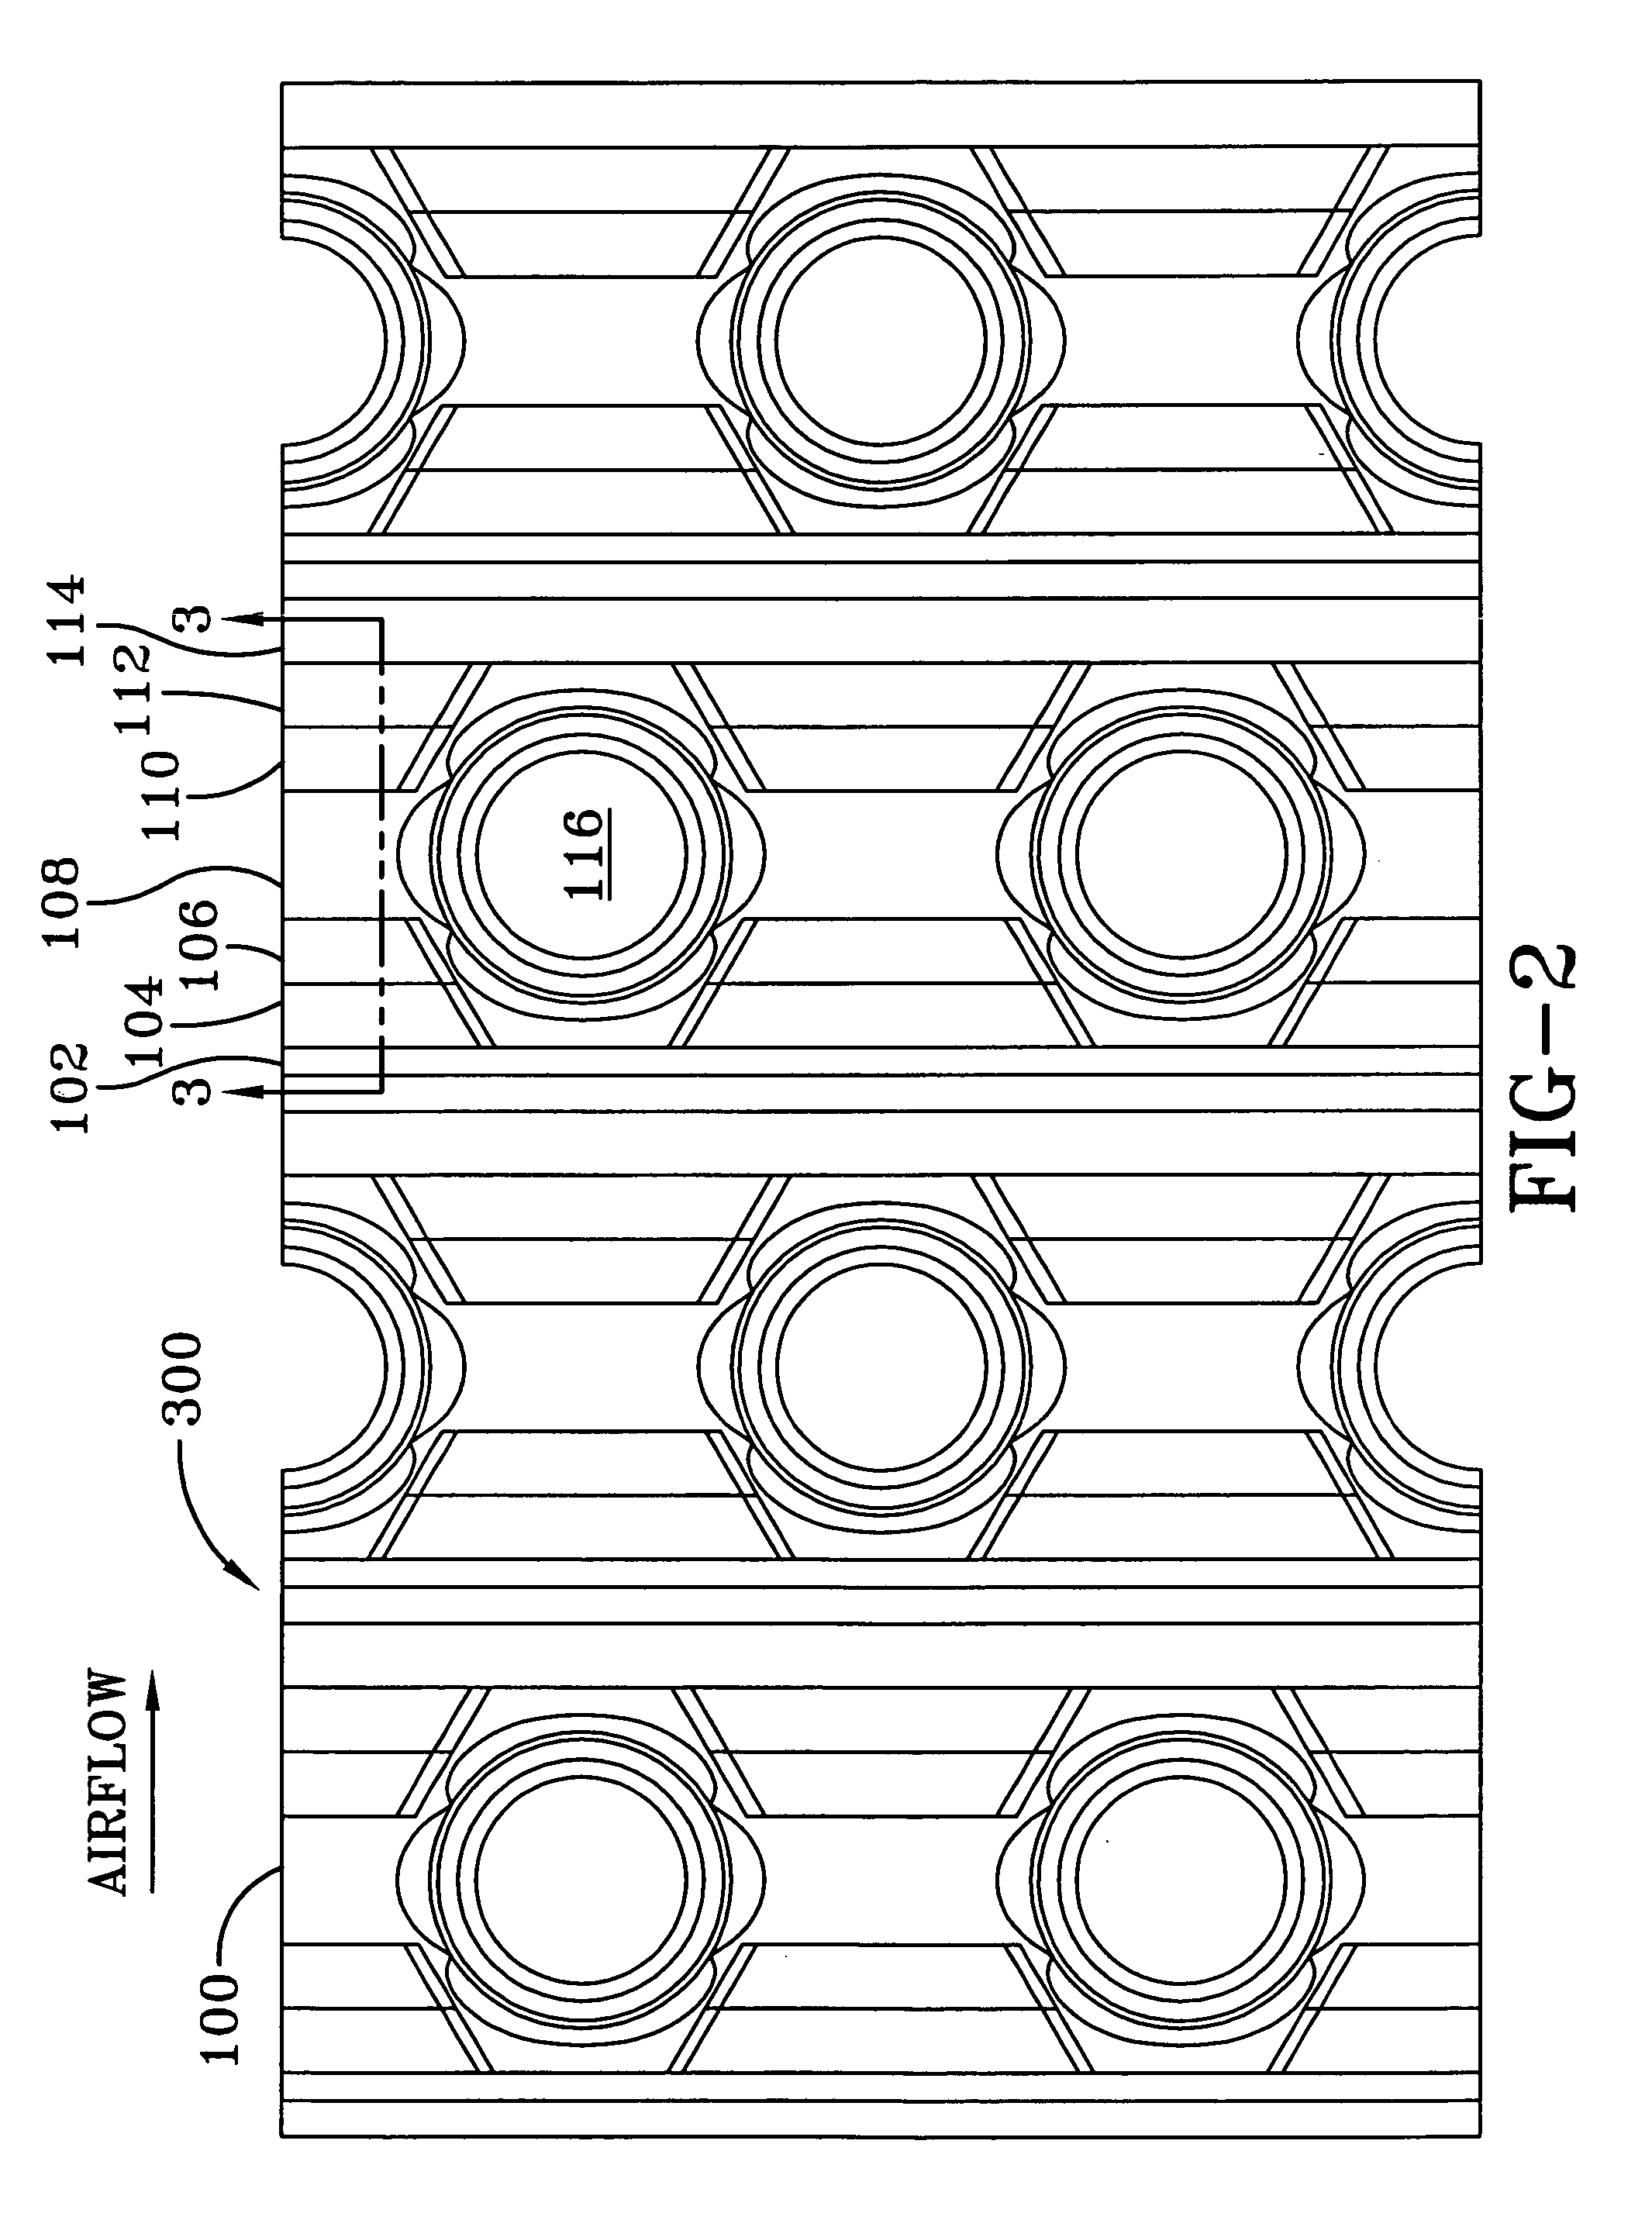 High-V plate fin for a heat exchanger and method of manufacturing